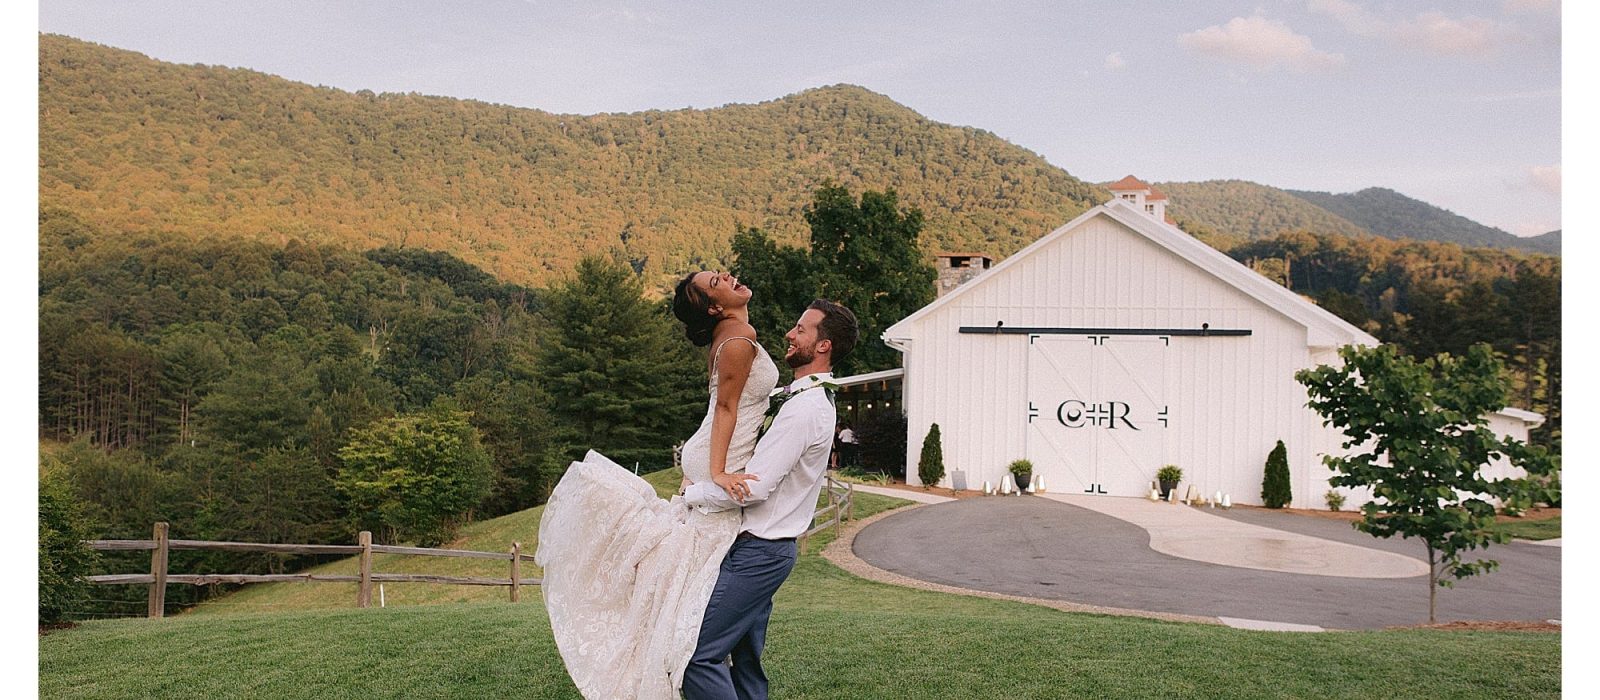 groom hugging bride and lifting her up in grassy field with mountains in background